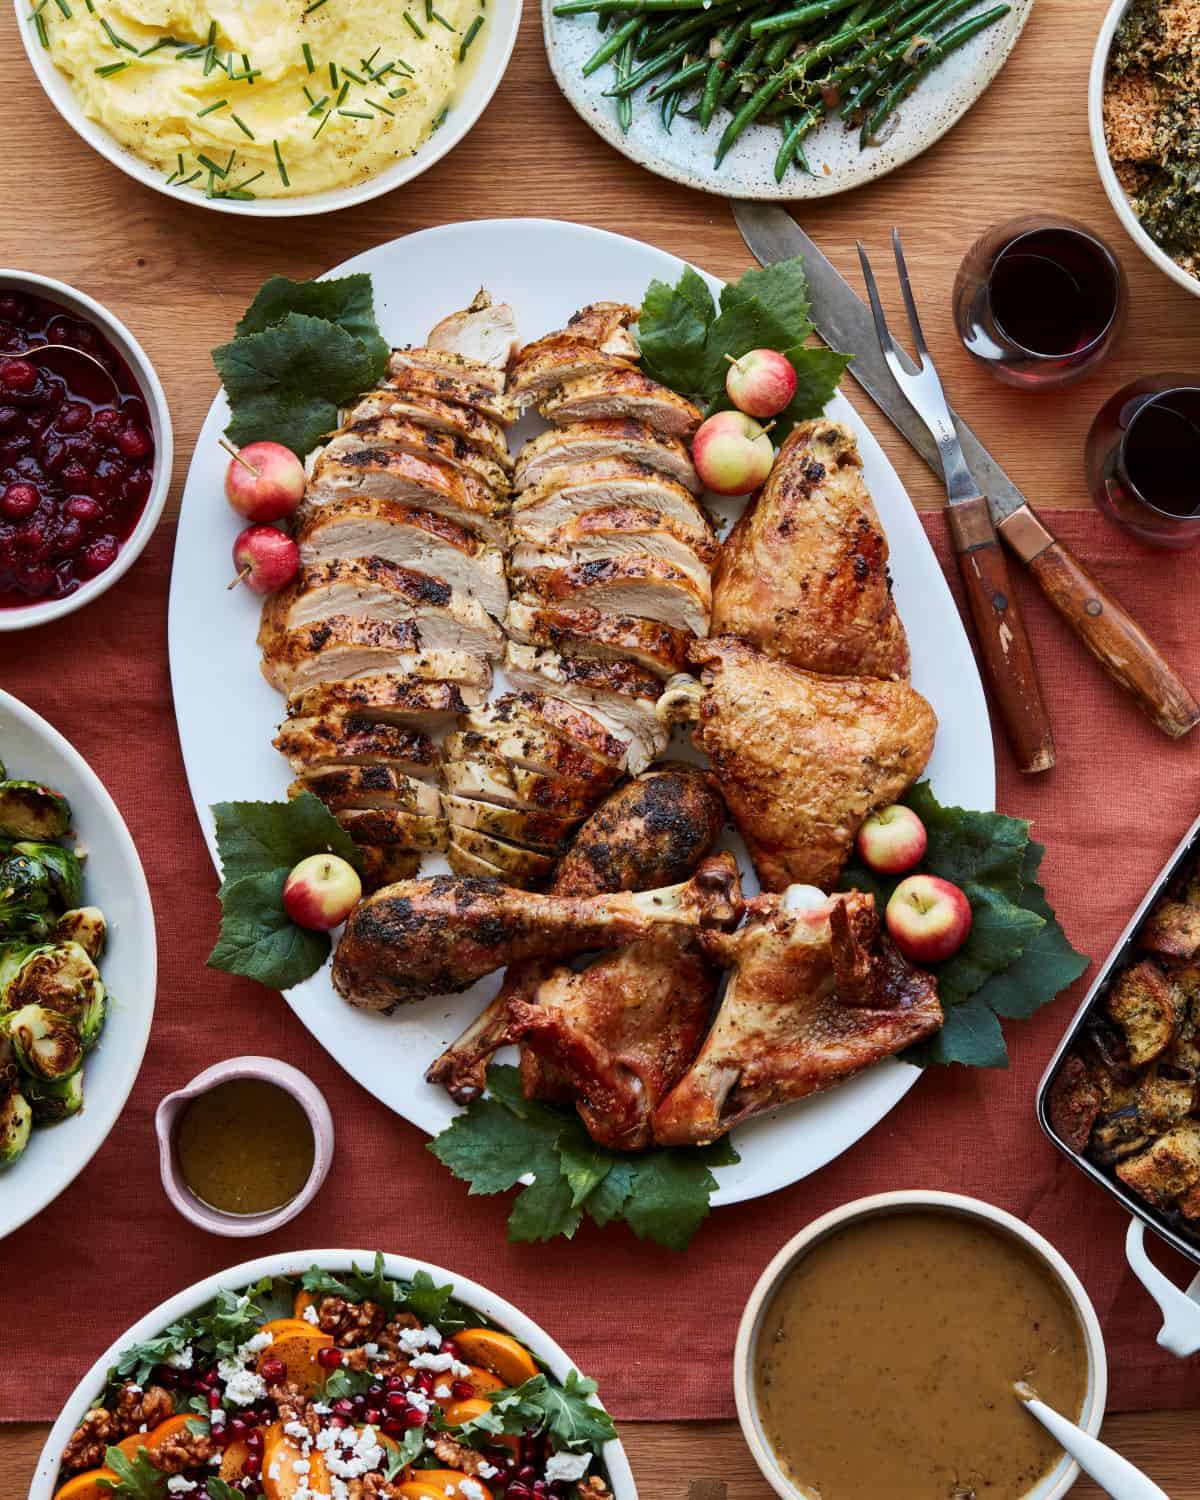 A shot of a Thanksgiving dinner table from top, with a carved herb roasted turkey in a white plate in the center, with gravy, red wine, cranberry sauce, brussels sprouts, mashed potatoes, green beans and stuffing around it, and a carving fork and knife next to the turkey plate.